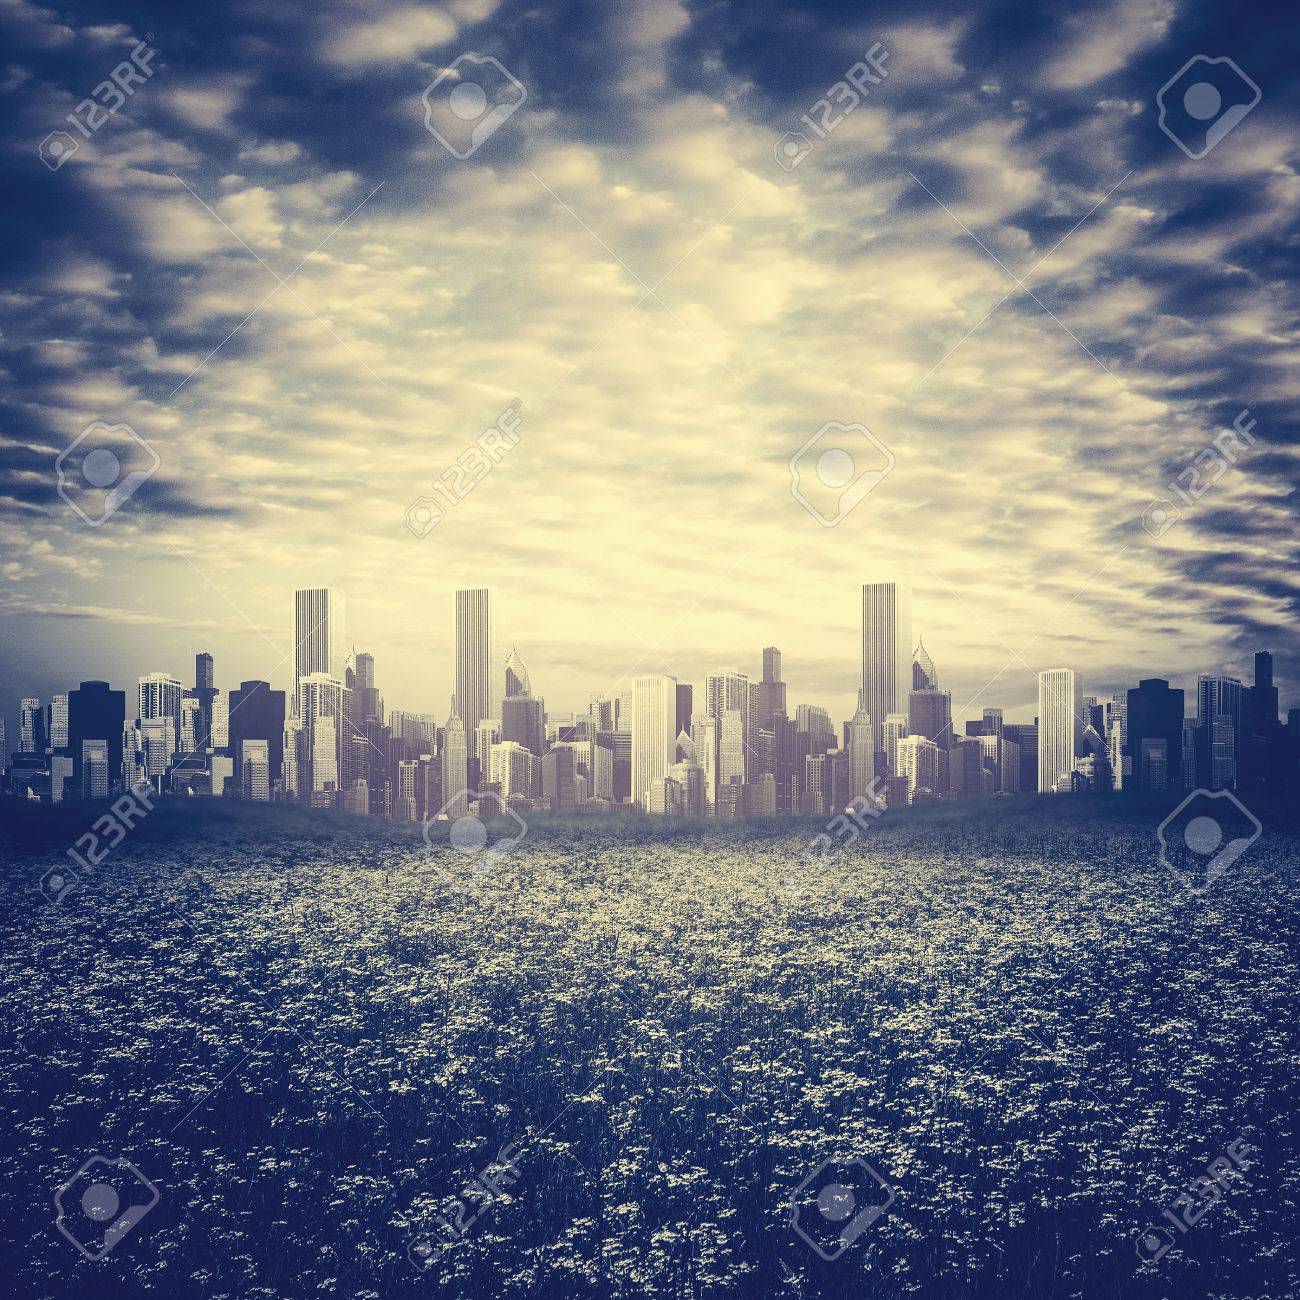 Far Away Abstract Urban Background Stock Photo Picture And